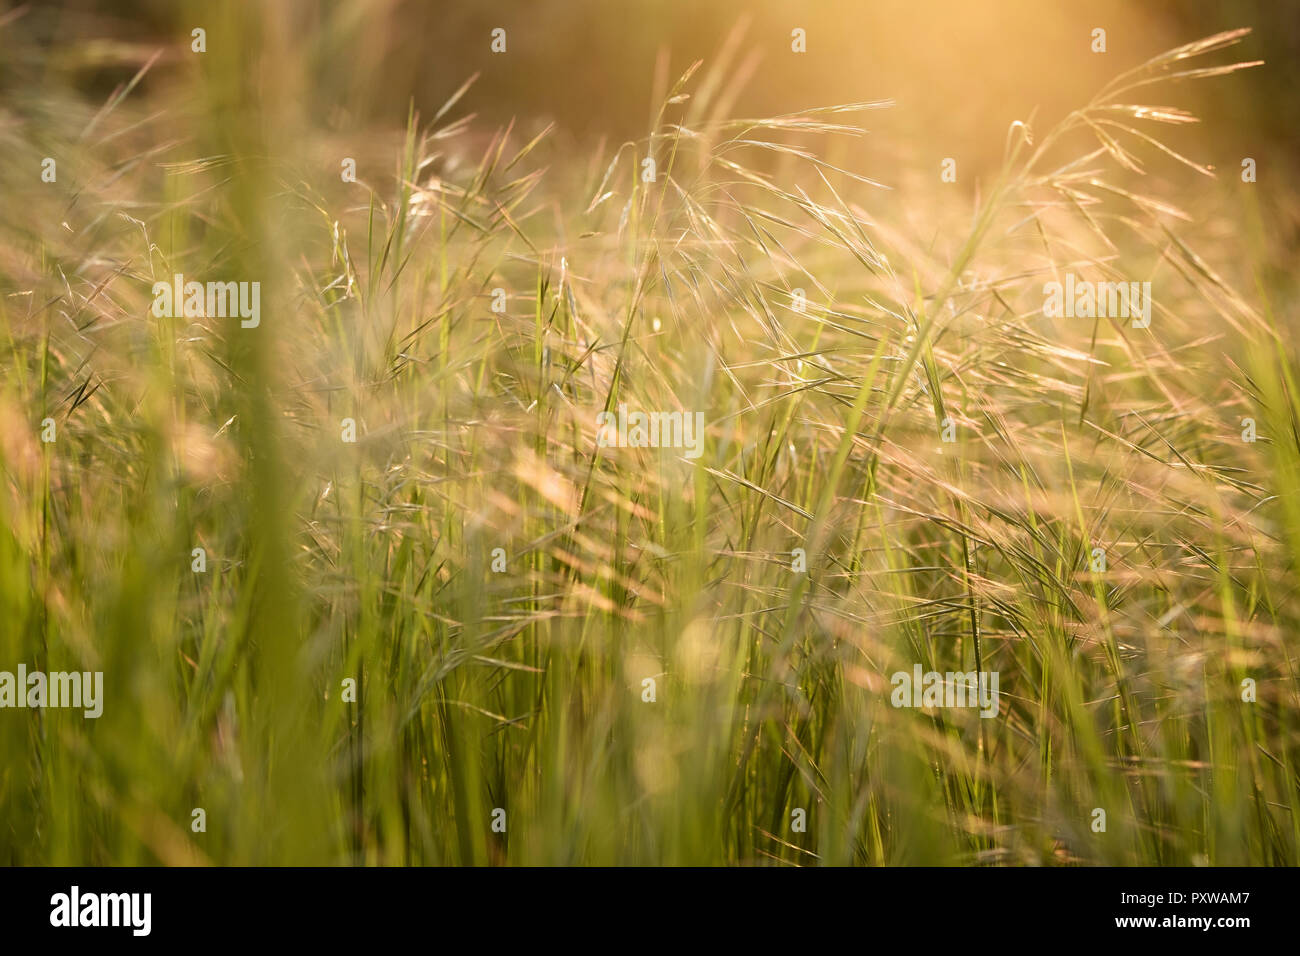 Turin, Italy – March 21 2014: golden grass sunlight in the field Stock Photo